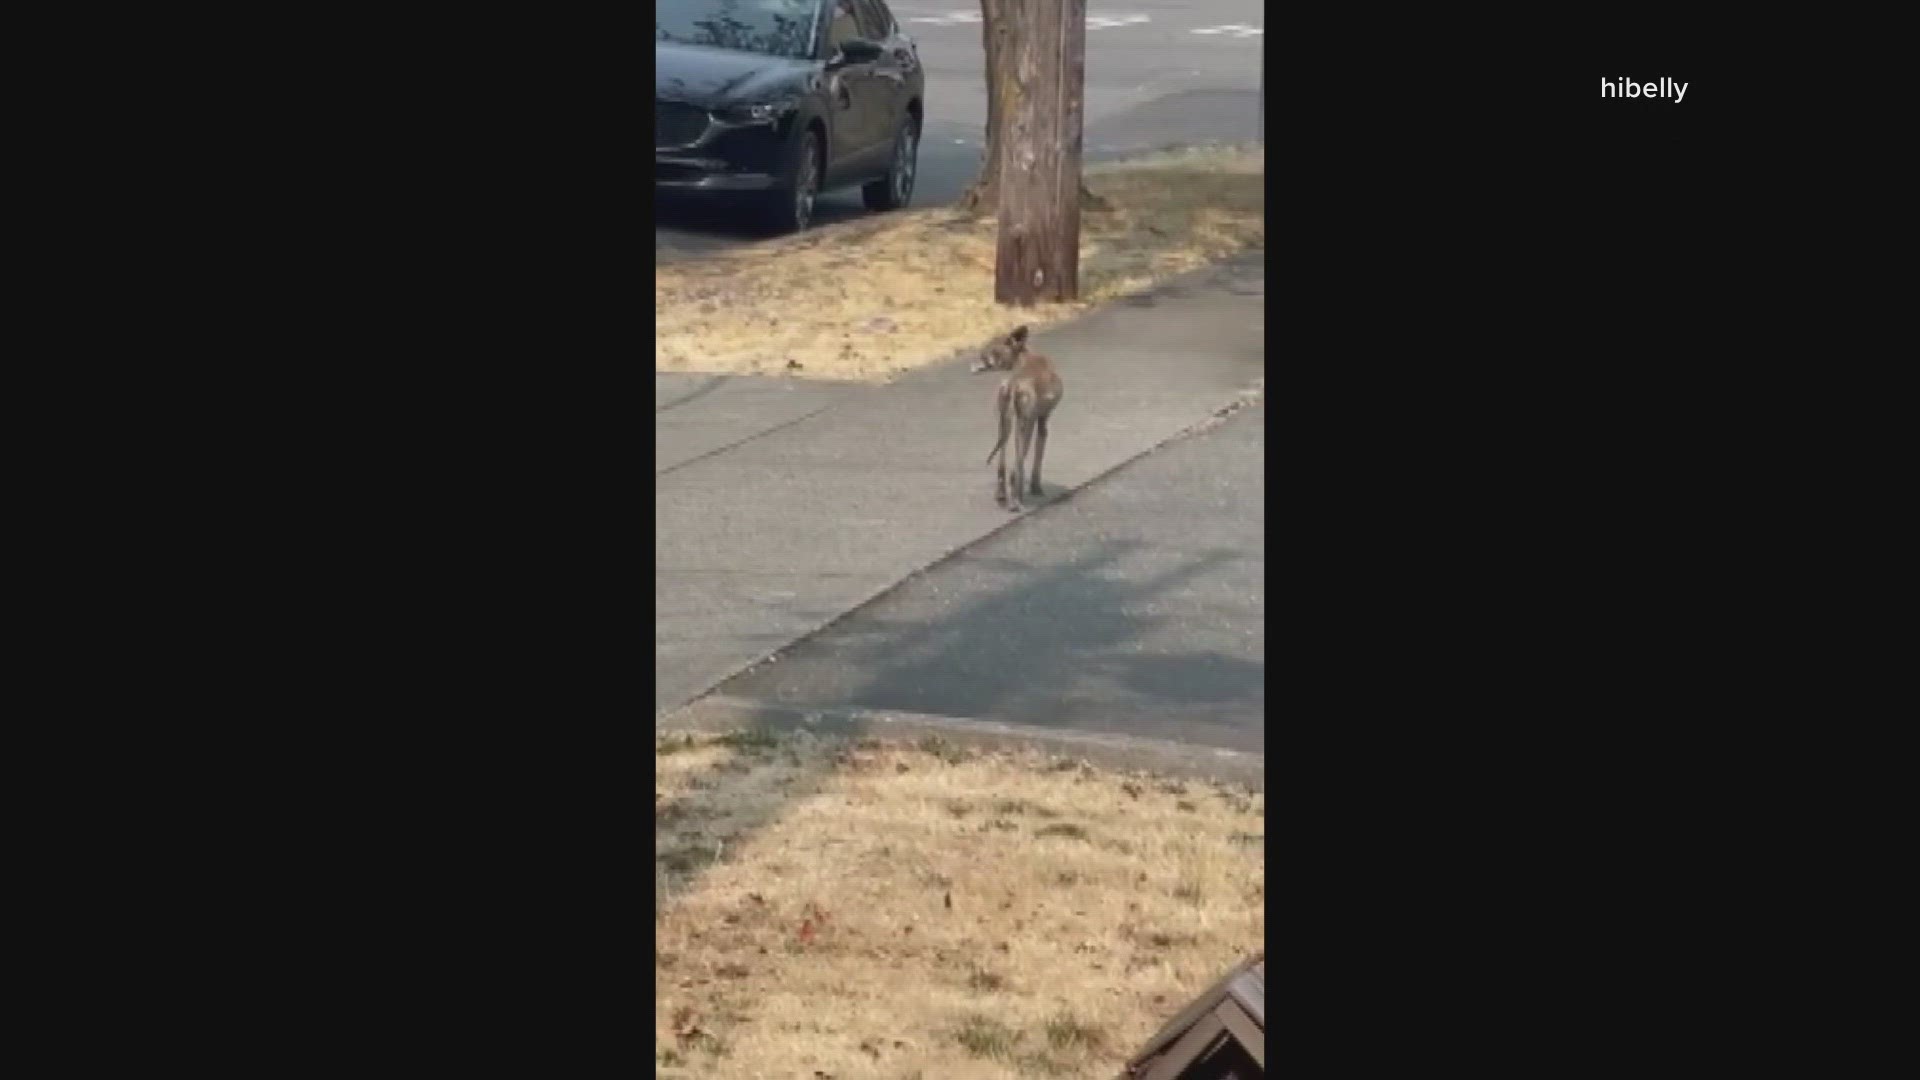 People have reported seeing a coyote several times in Tacoma's Hilltop neighborhood over the last few months.